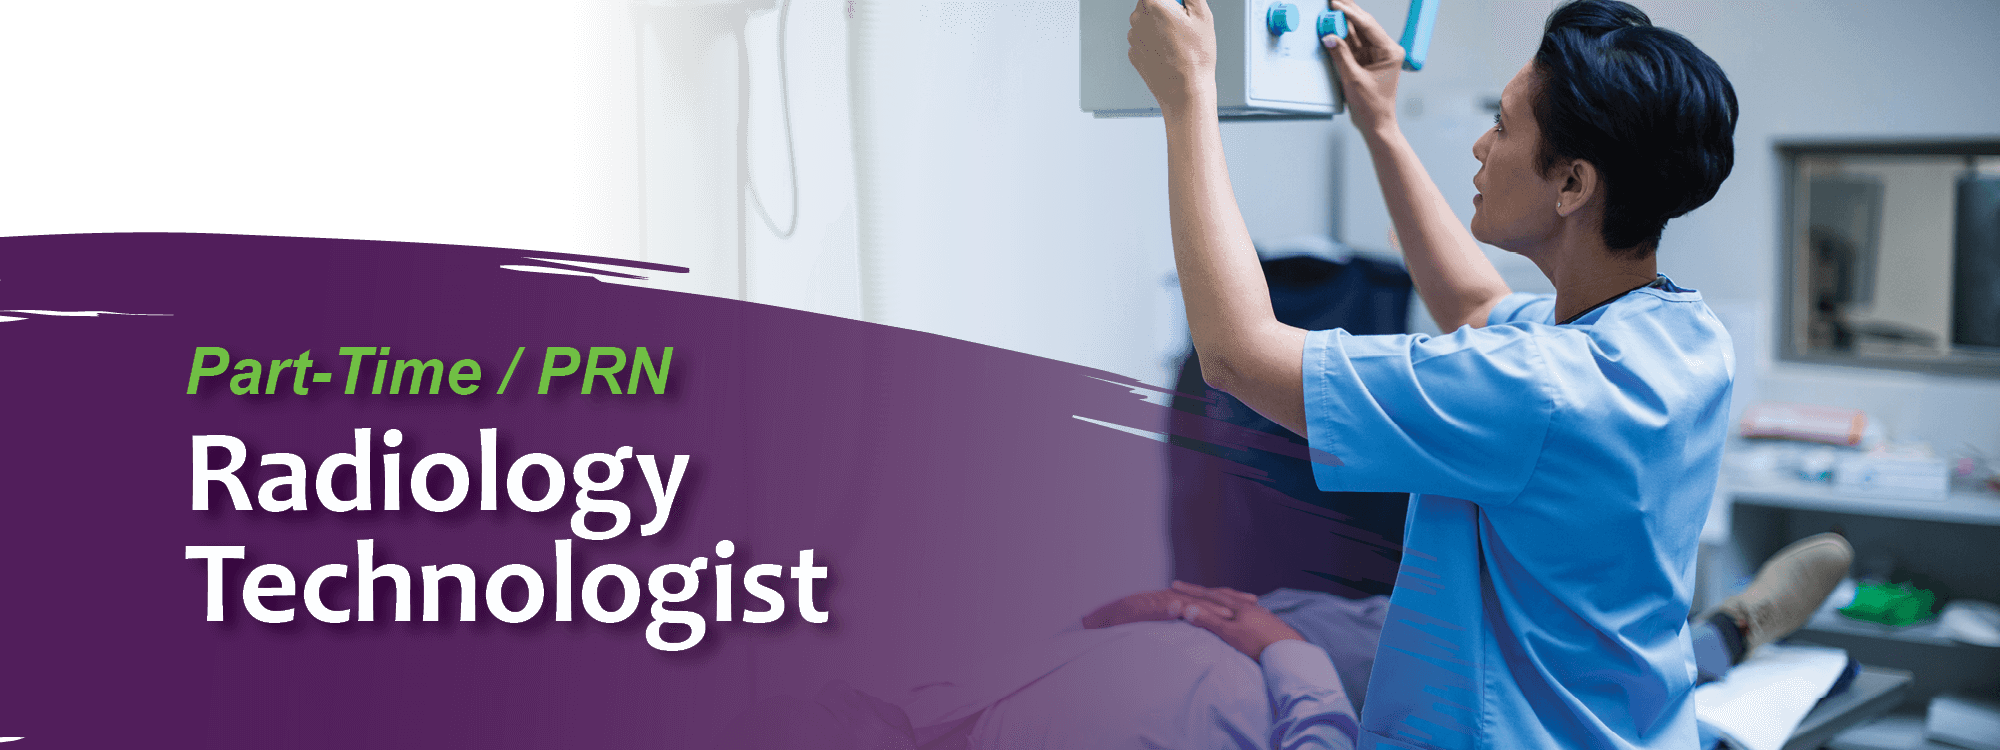 X-ray tech taking an x-ray image. Image text: part-time / PRN Radiology Technologist